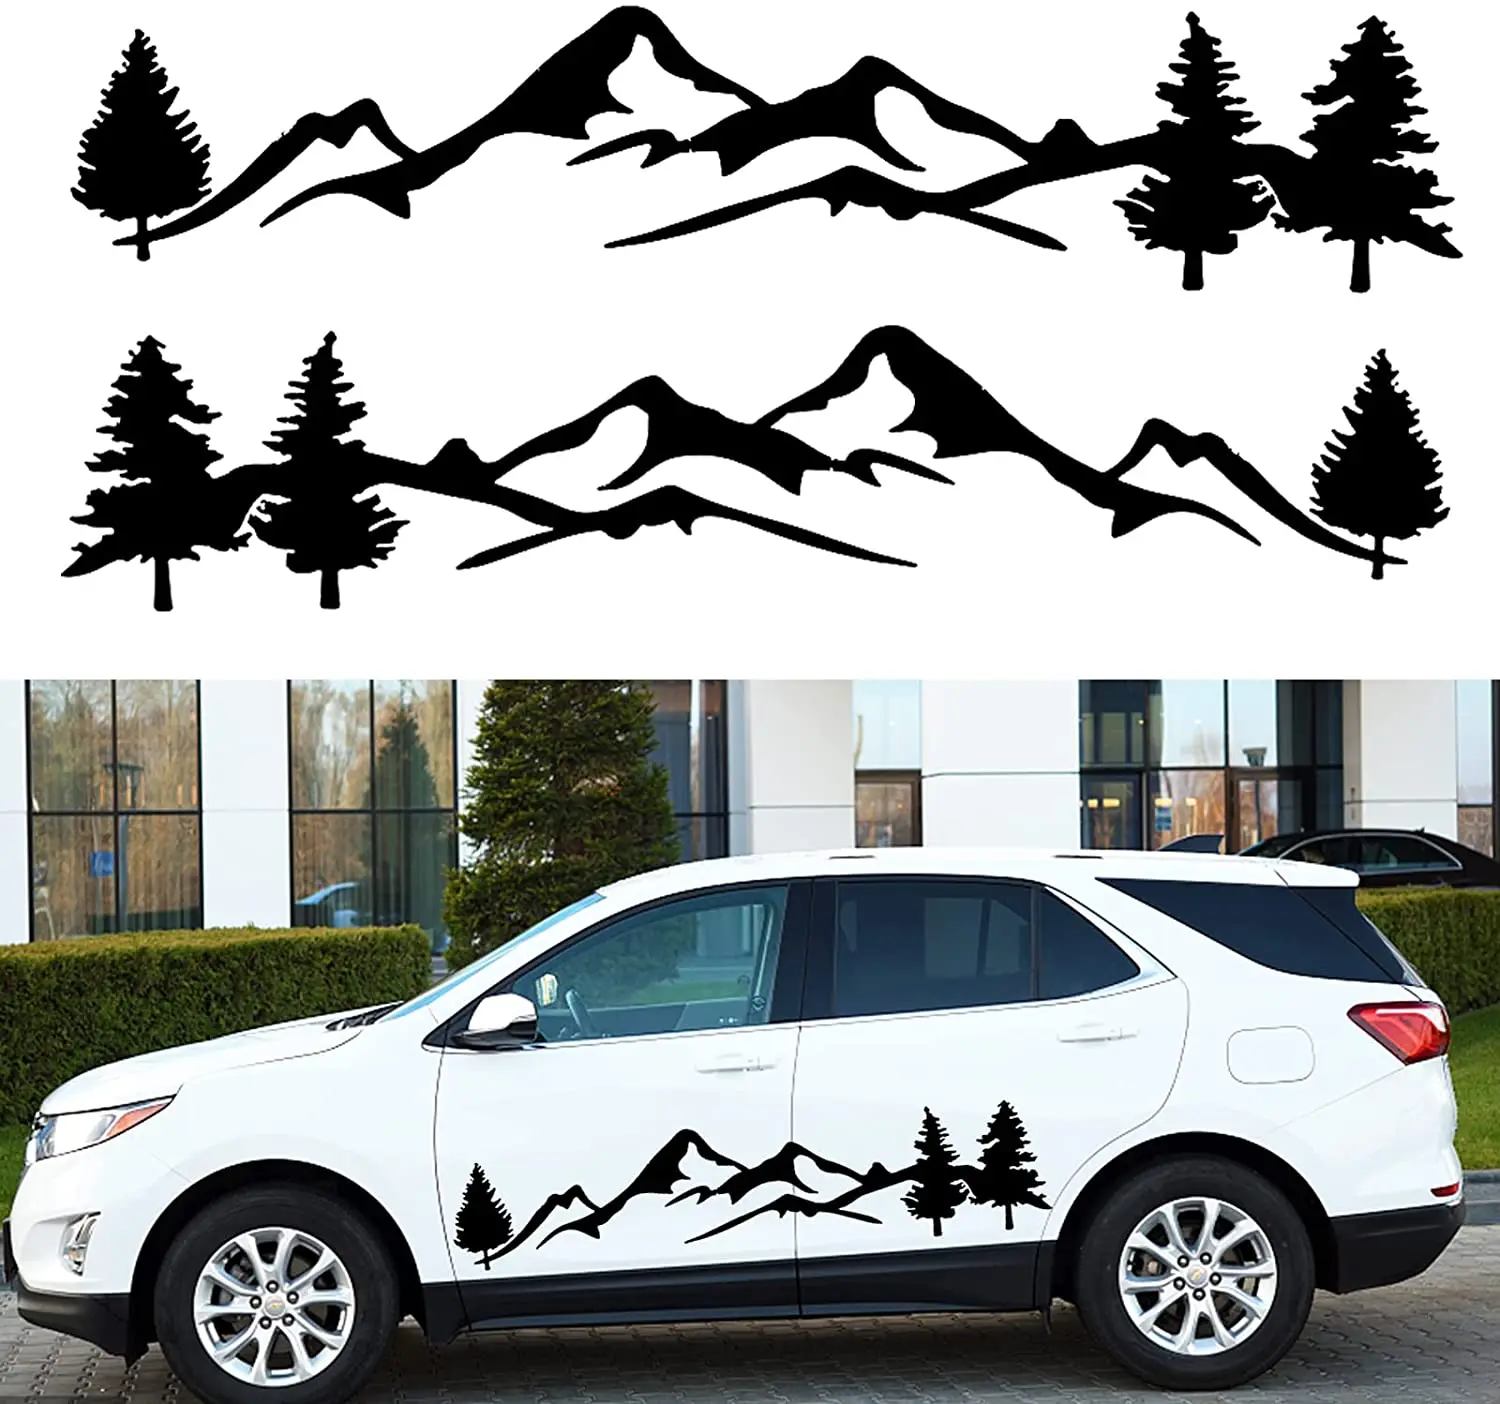 

Fochutech Large Car Stickers Mountains Car Decals for Men Side Car Decals and Graphics Tree Vinyl Stickers for Car Body Door